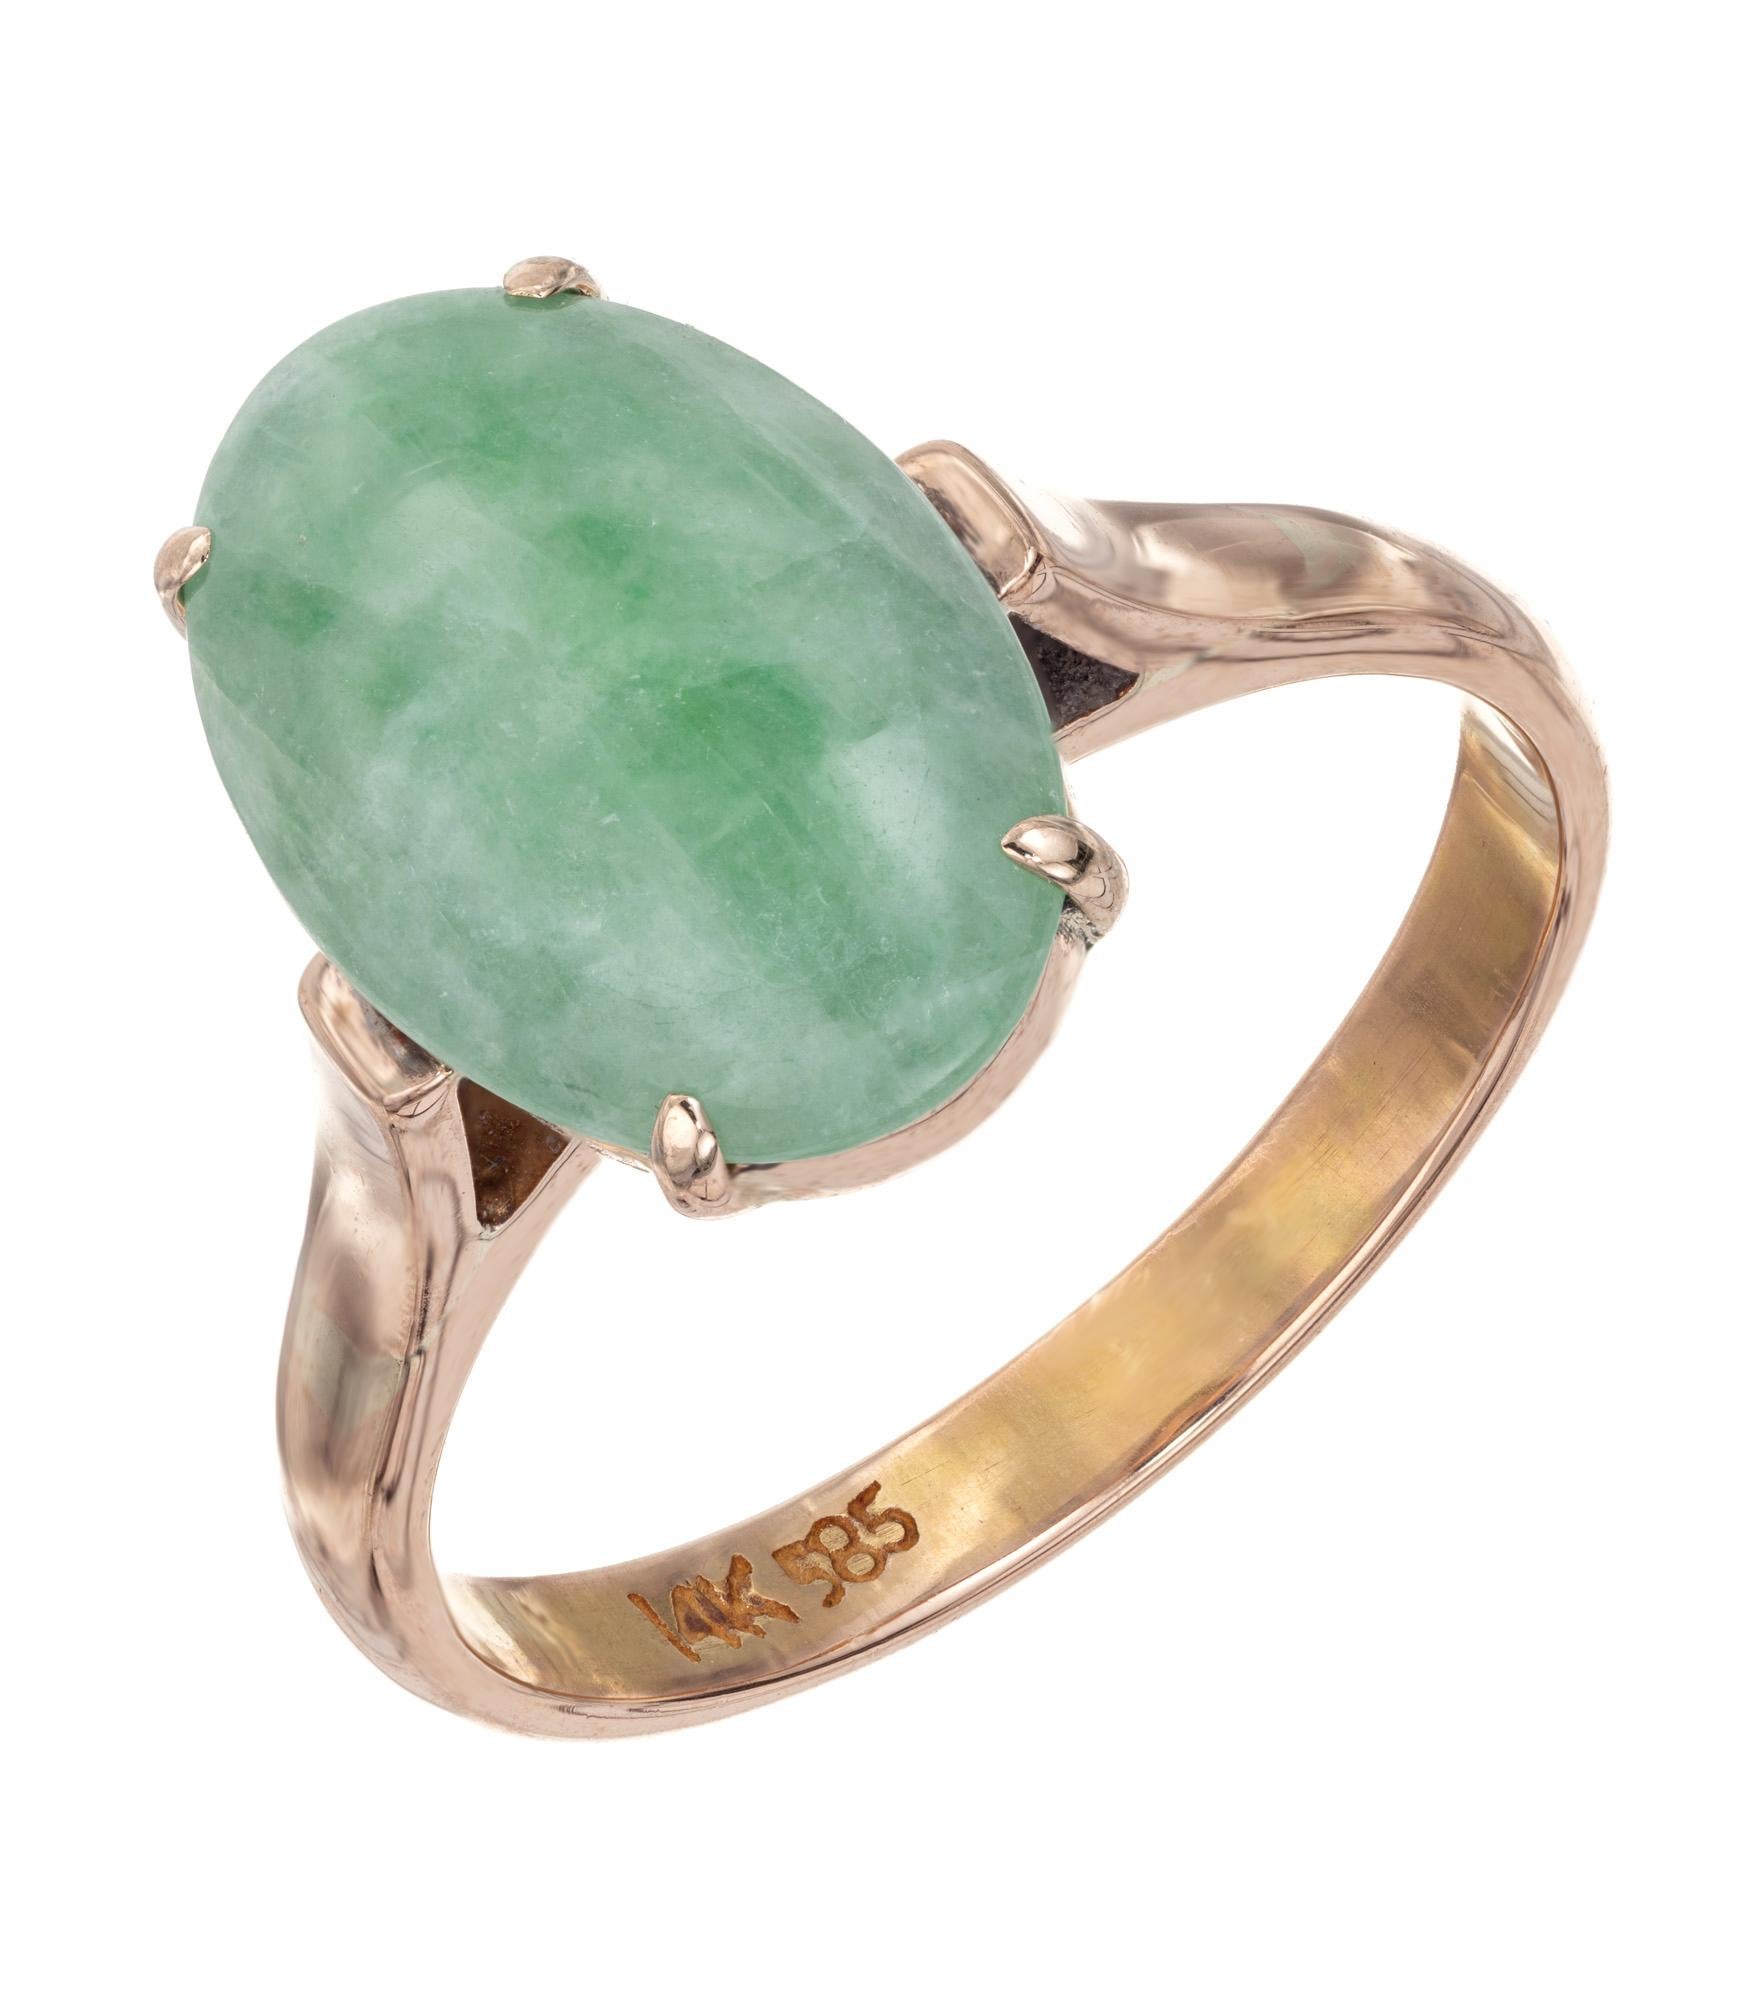 1960's Mid-Century Jadeite Jade ring. Oval cabochon jadeite jade set in a 14k rose gold four prong setting. GIA certified ad natural color, no indications of impregnation.

Follow us on our 1stdibs storefront to view our weekly new additions and 5